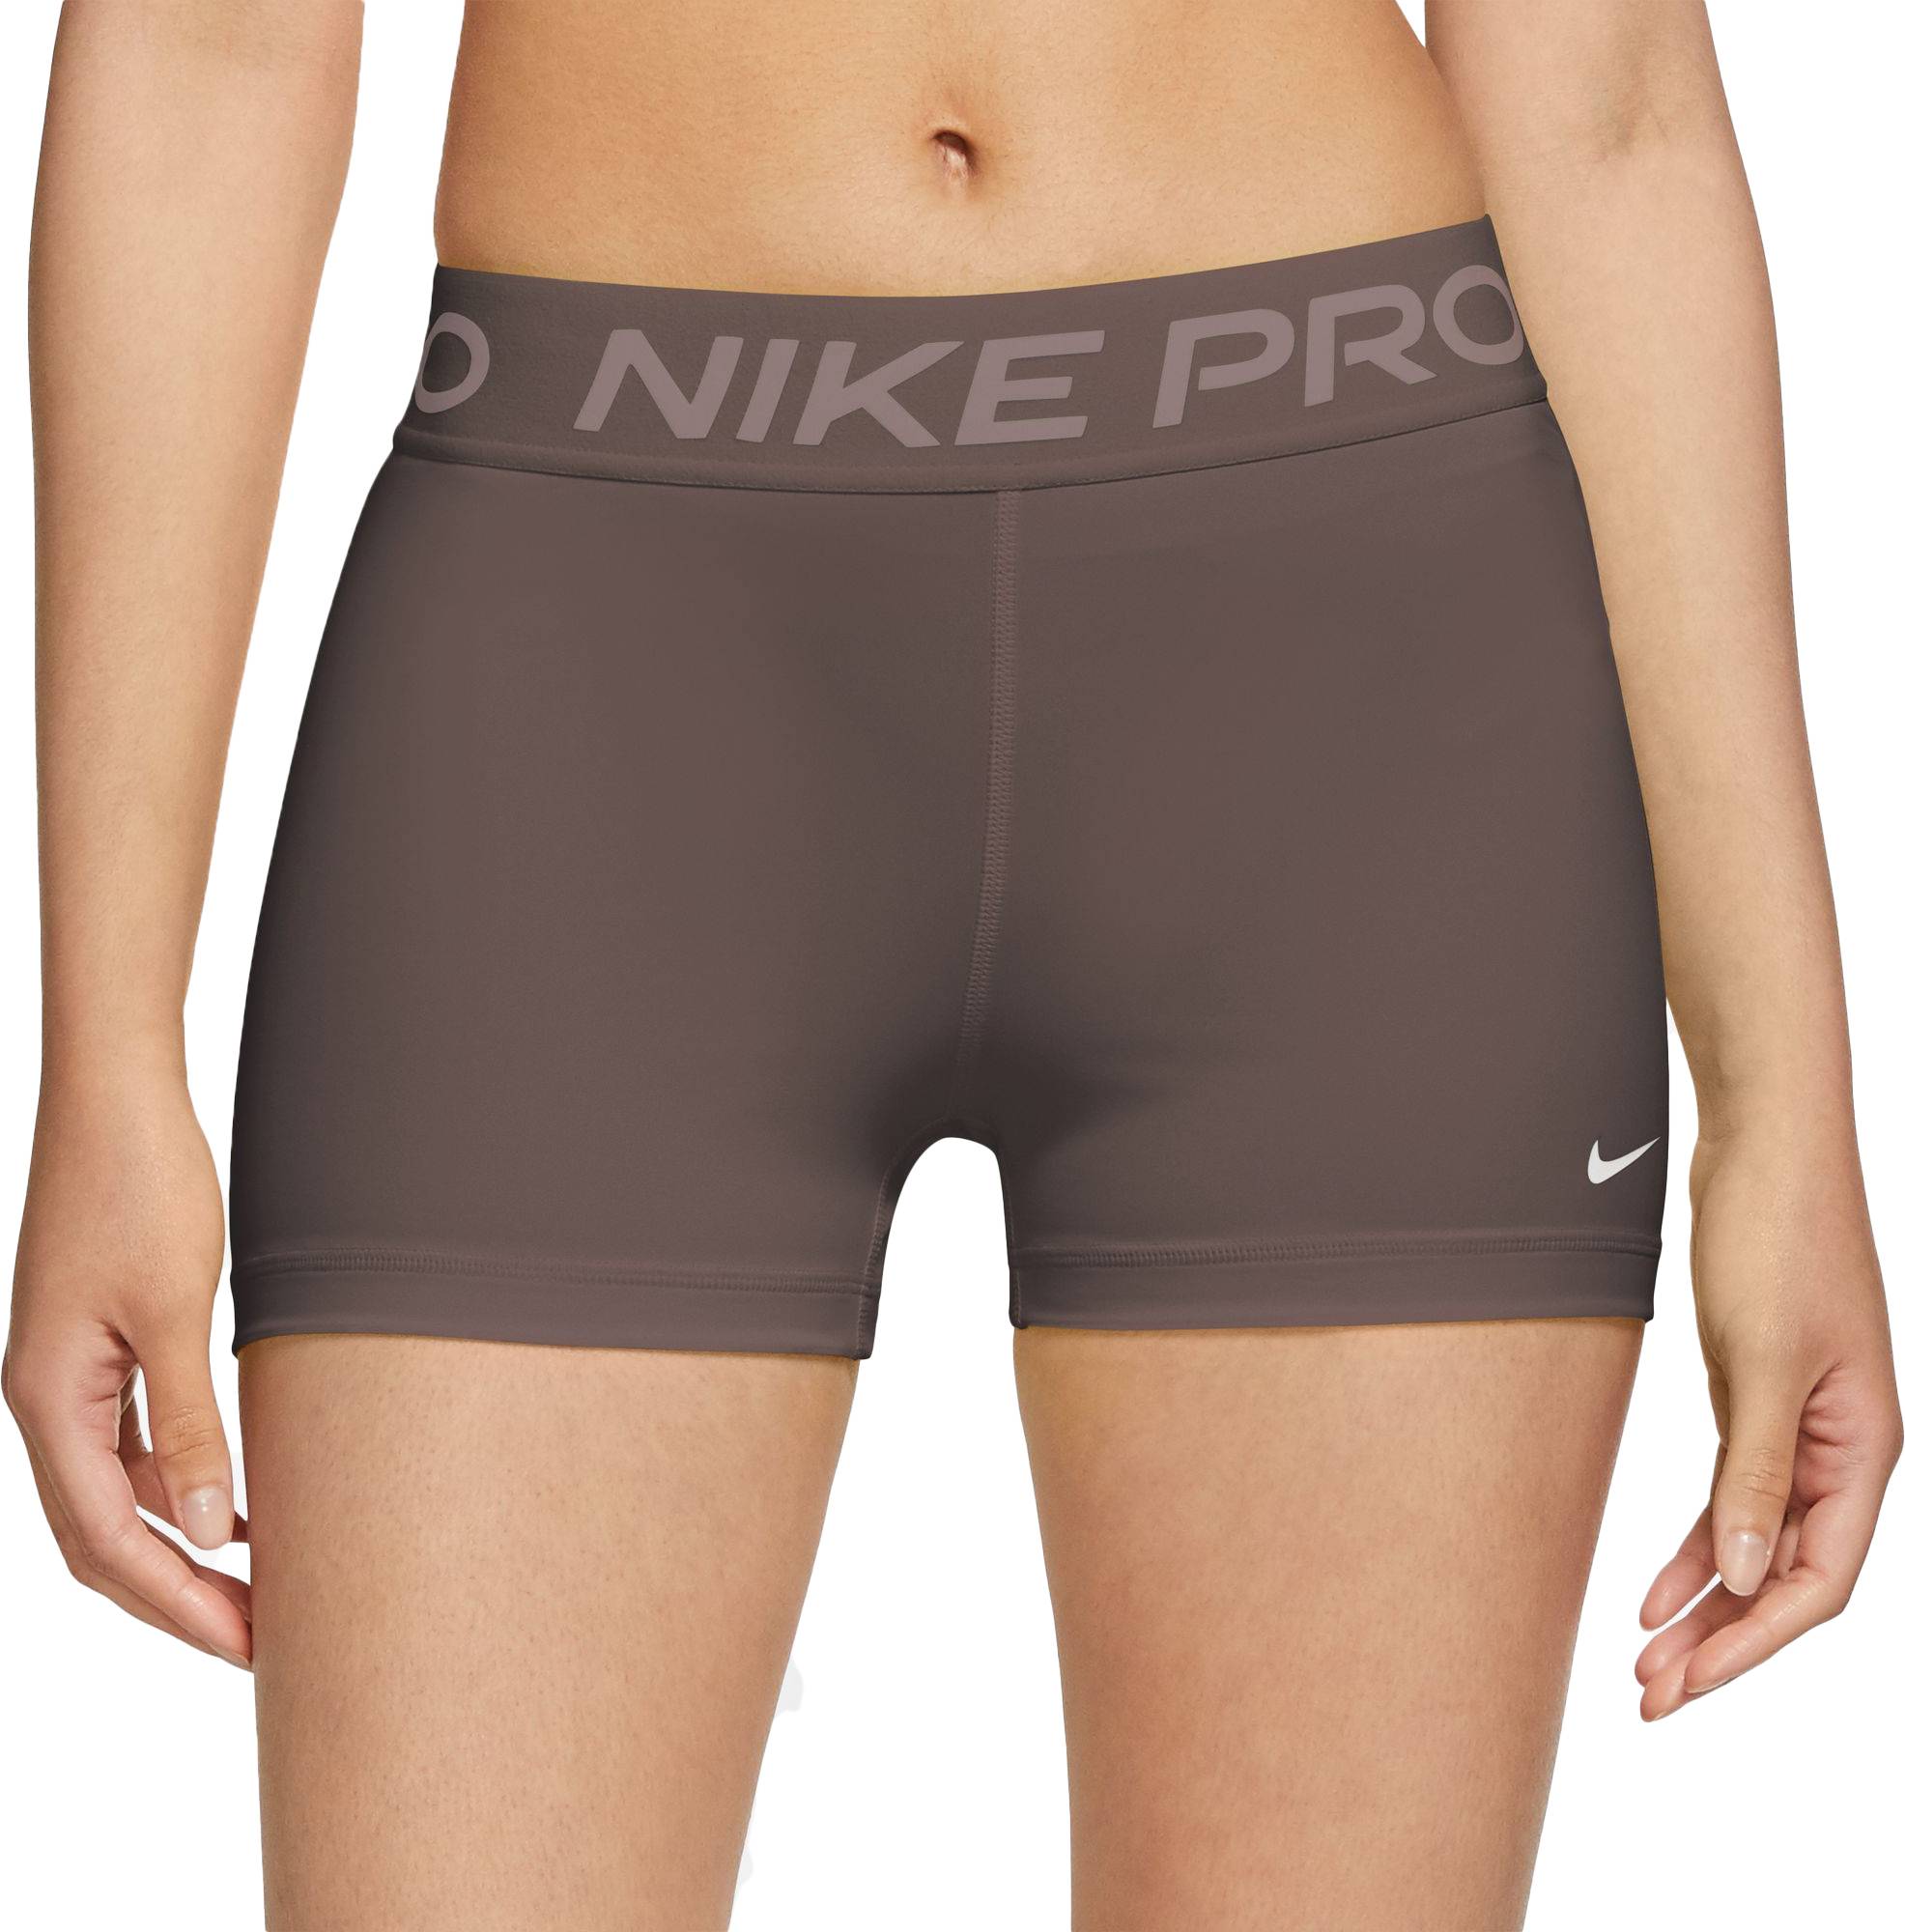 bobby hillock recommends Nike Pro Volleyball Spandex Shorts